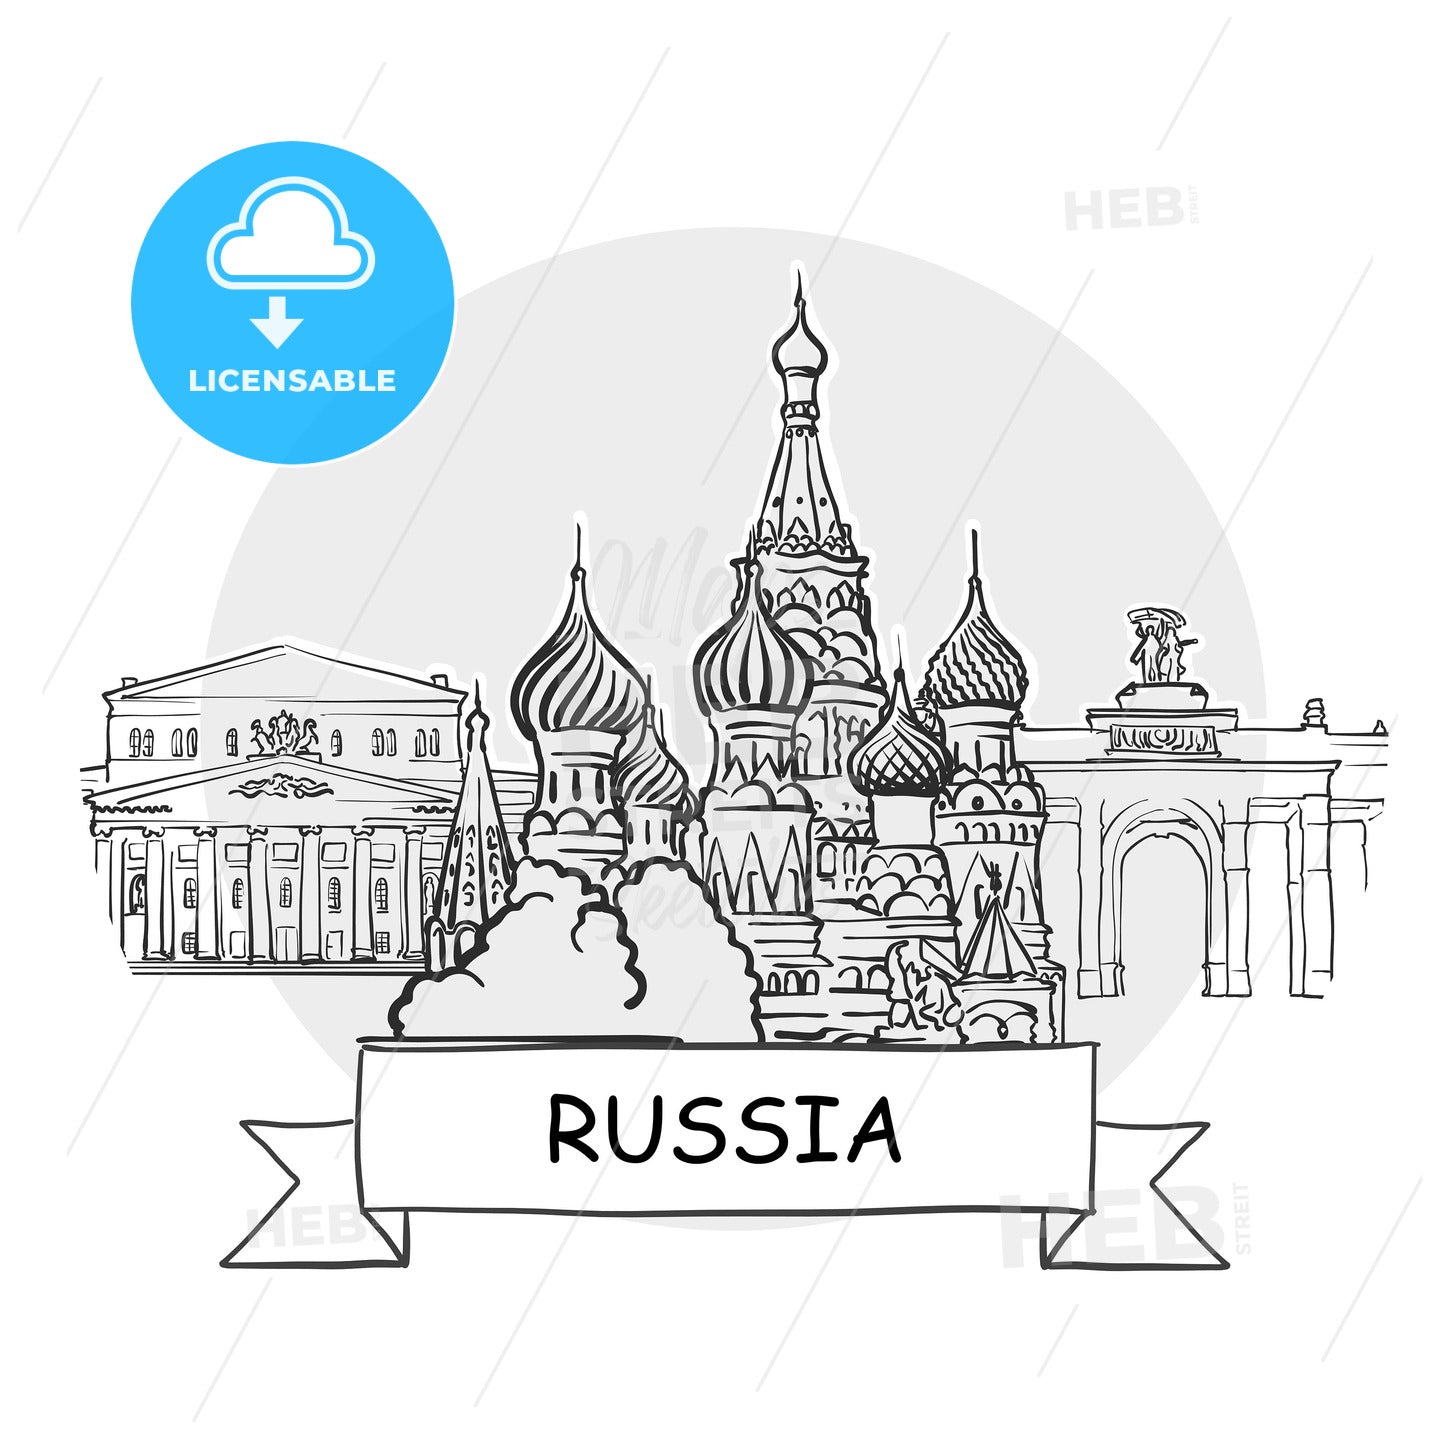 Russia hand-drawn urban vector sign – instant download